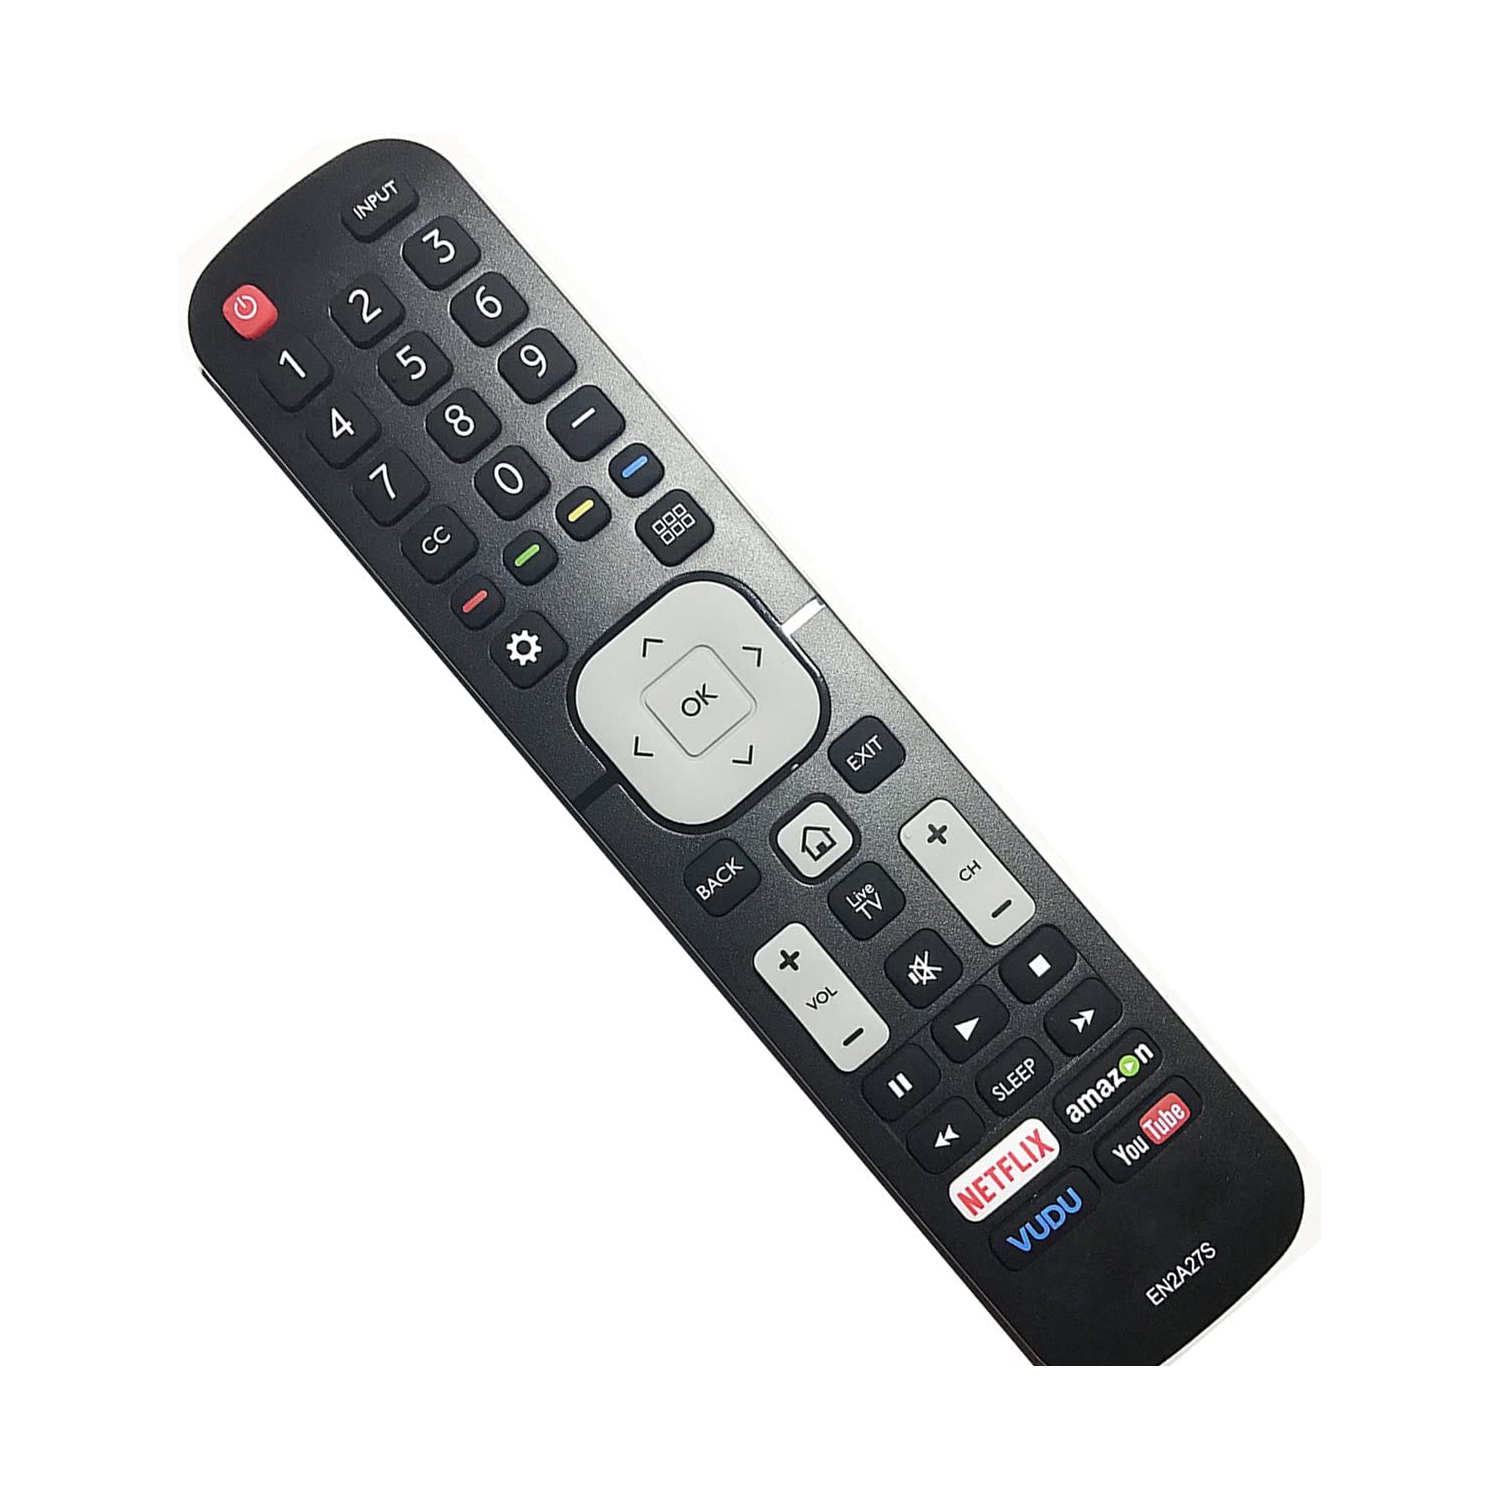 New EN2A27S Remote Control for Sharp Smart TV 55H6B 50H7GB 50H6B N6200U LC-40N5000U LC-43N5000U LC-50N5000U LC-50N6000U LC-50N7000U LC-55N620CU LC-65N9000U LC-75N620U LC-75N8000U